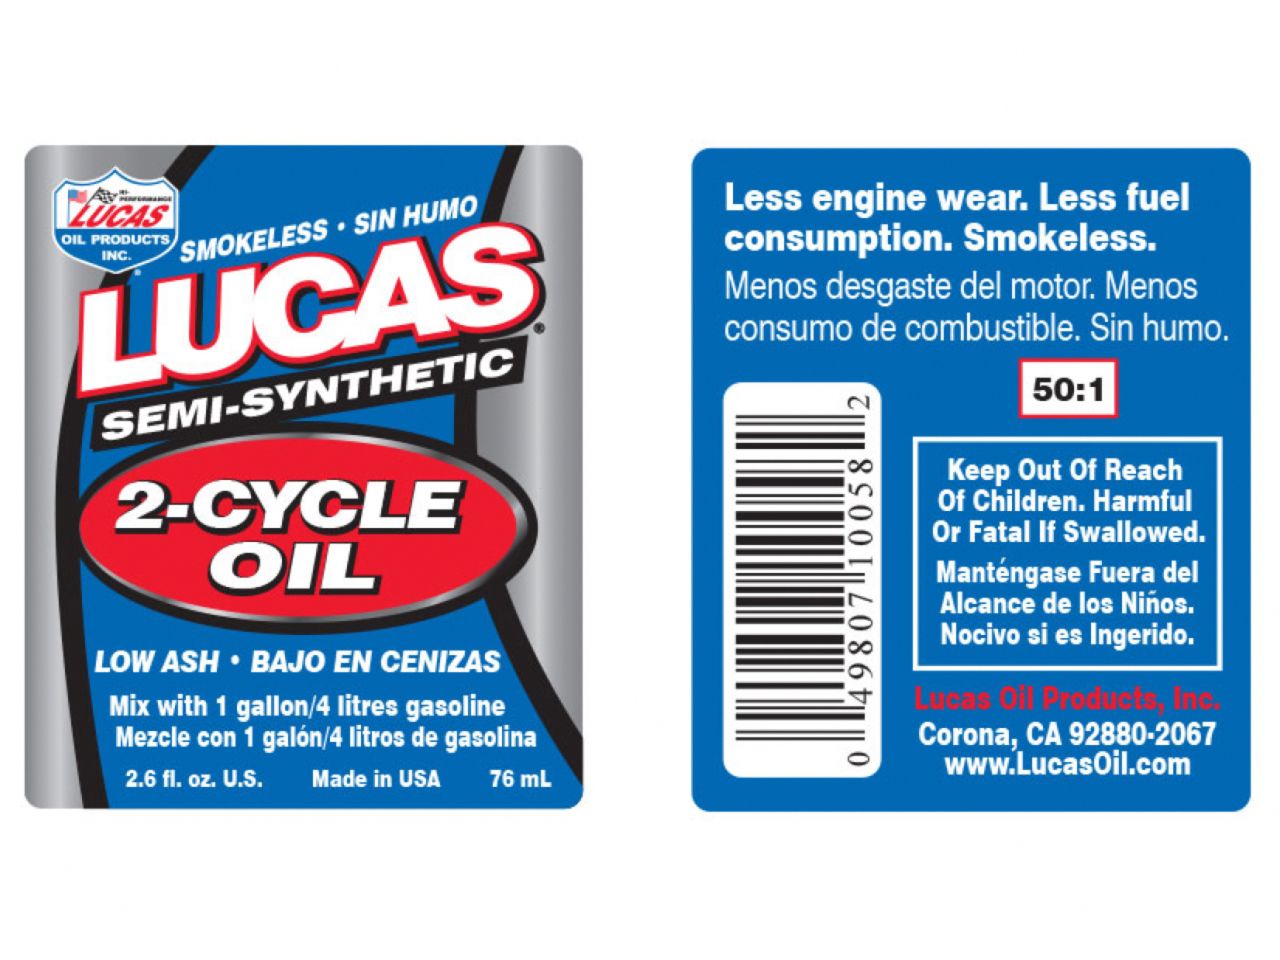 Lucas Oil Semi-synthetic 2-cycle Oi